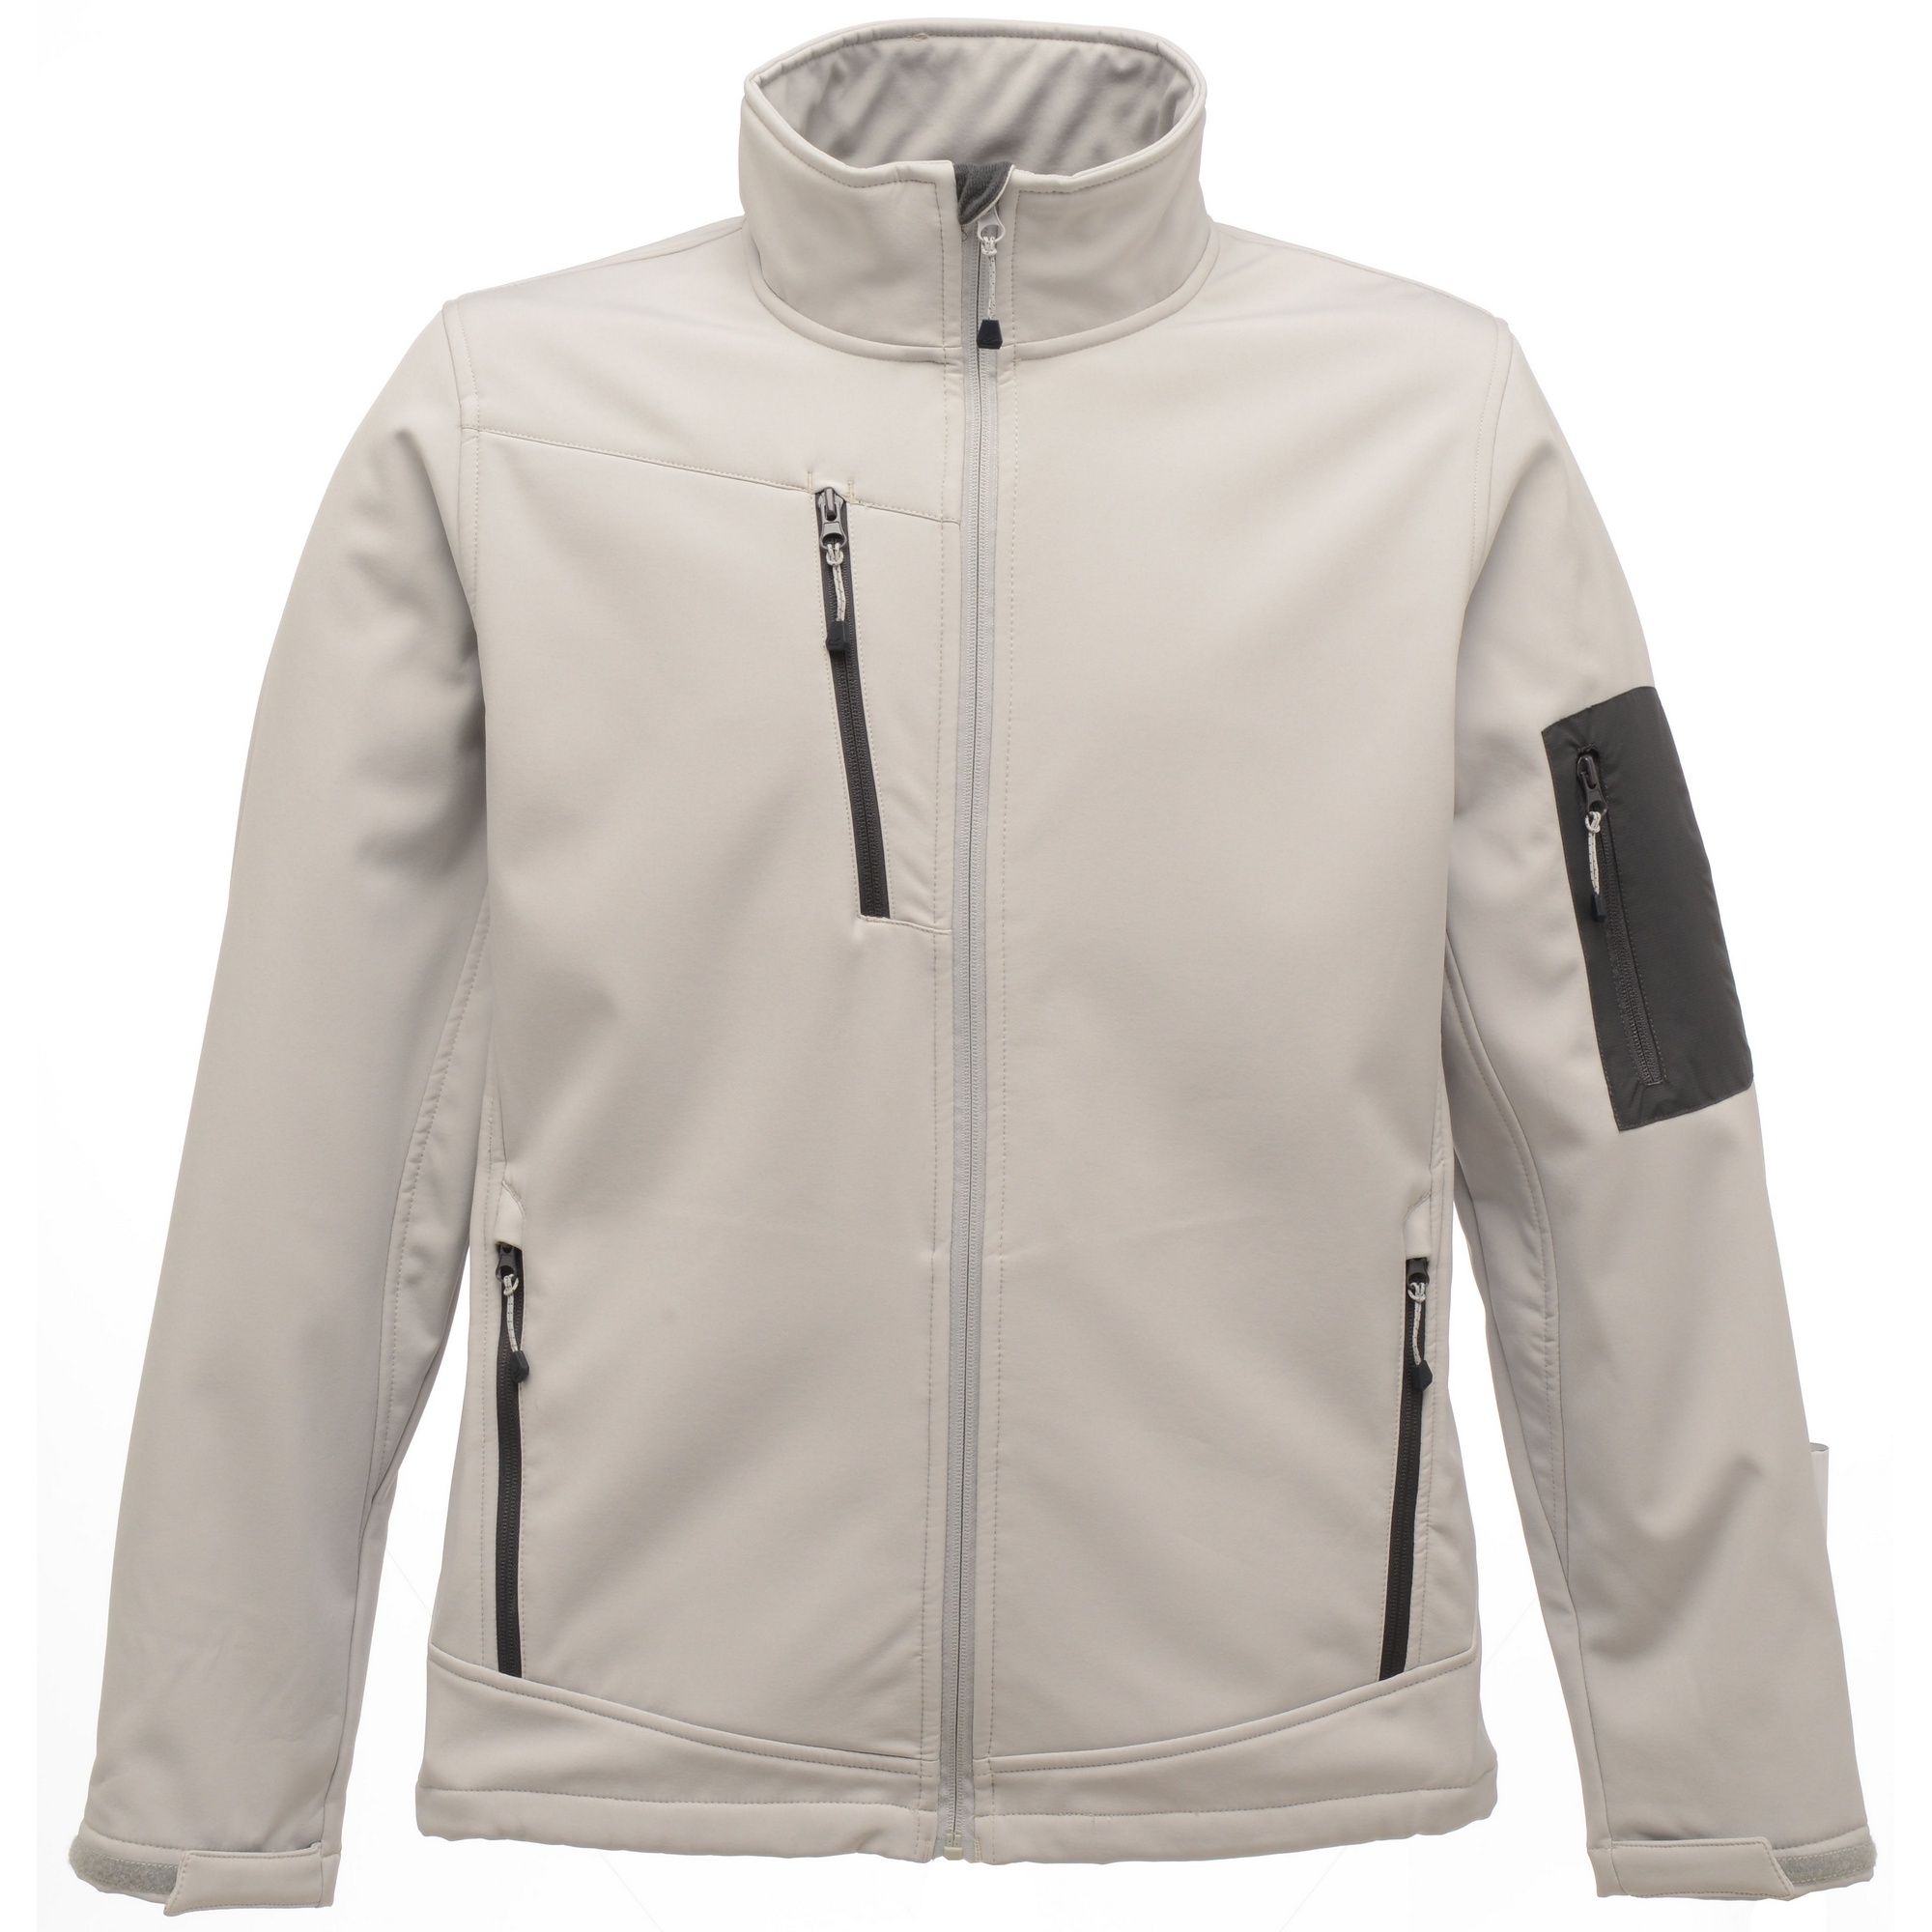 96% Polyester, 4% Elastane. 3 zipped lower and 1 chest pocket. 1 zipped sleeve pocket. Adjustable cuffs. Adjustable shockcord hem. Inner zip guard. Shaped fit (Women only). Fabric: Warm backed woven Softshell XPT waterproof and breathable 3 layer membrane fabric. Wind resistant membrane fabric. ATL durable water repellent finish. Regatta Womens sizing (bust approx): 6 (30in/76cm), 8 (32in/81cm), 10 (34in/86cm), 12 (36in/92cm), 14 (38in/97cm), 16 (40in/102cm), 18 (43in/109cm), 20 (45in/114cm), 22 (48in/122cm), 24 (50in/127cm), 26 (52in/132cm), 28 (54in/137cm), 30 (56in/142cm), 32 (58in/147cm), 34 (60in/152cm), 36 (62in/158cm).